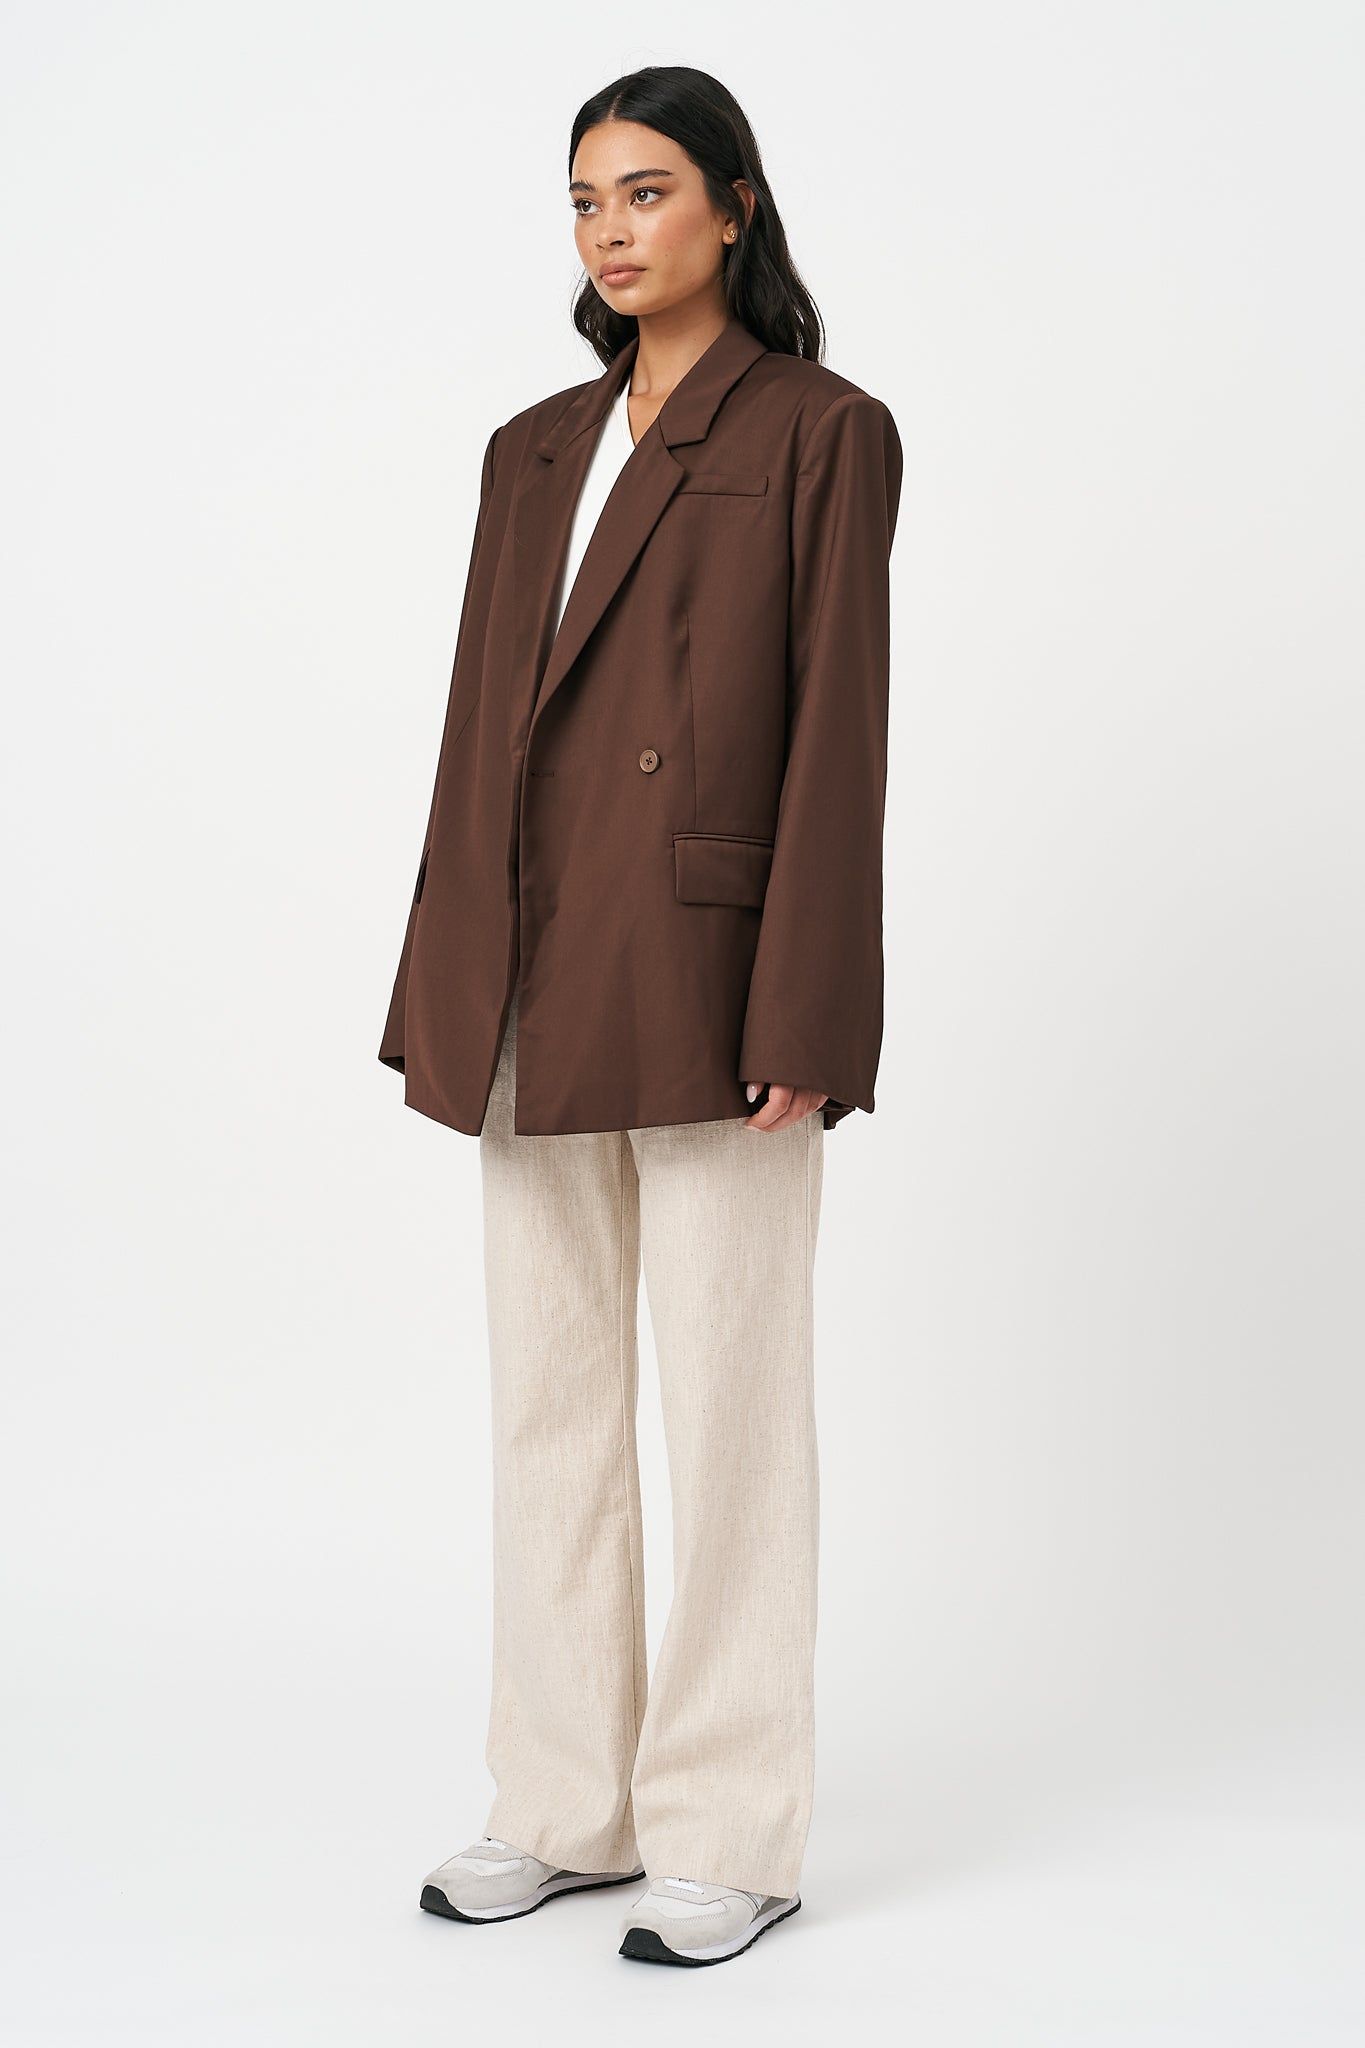 Refined Sophistication: Brown Blazers for Every Occasion